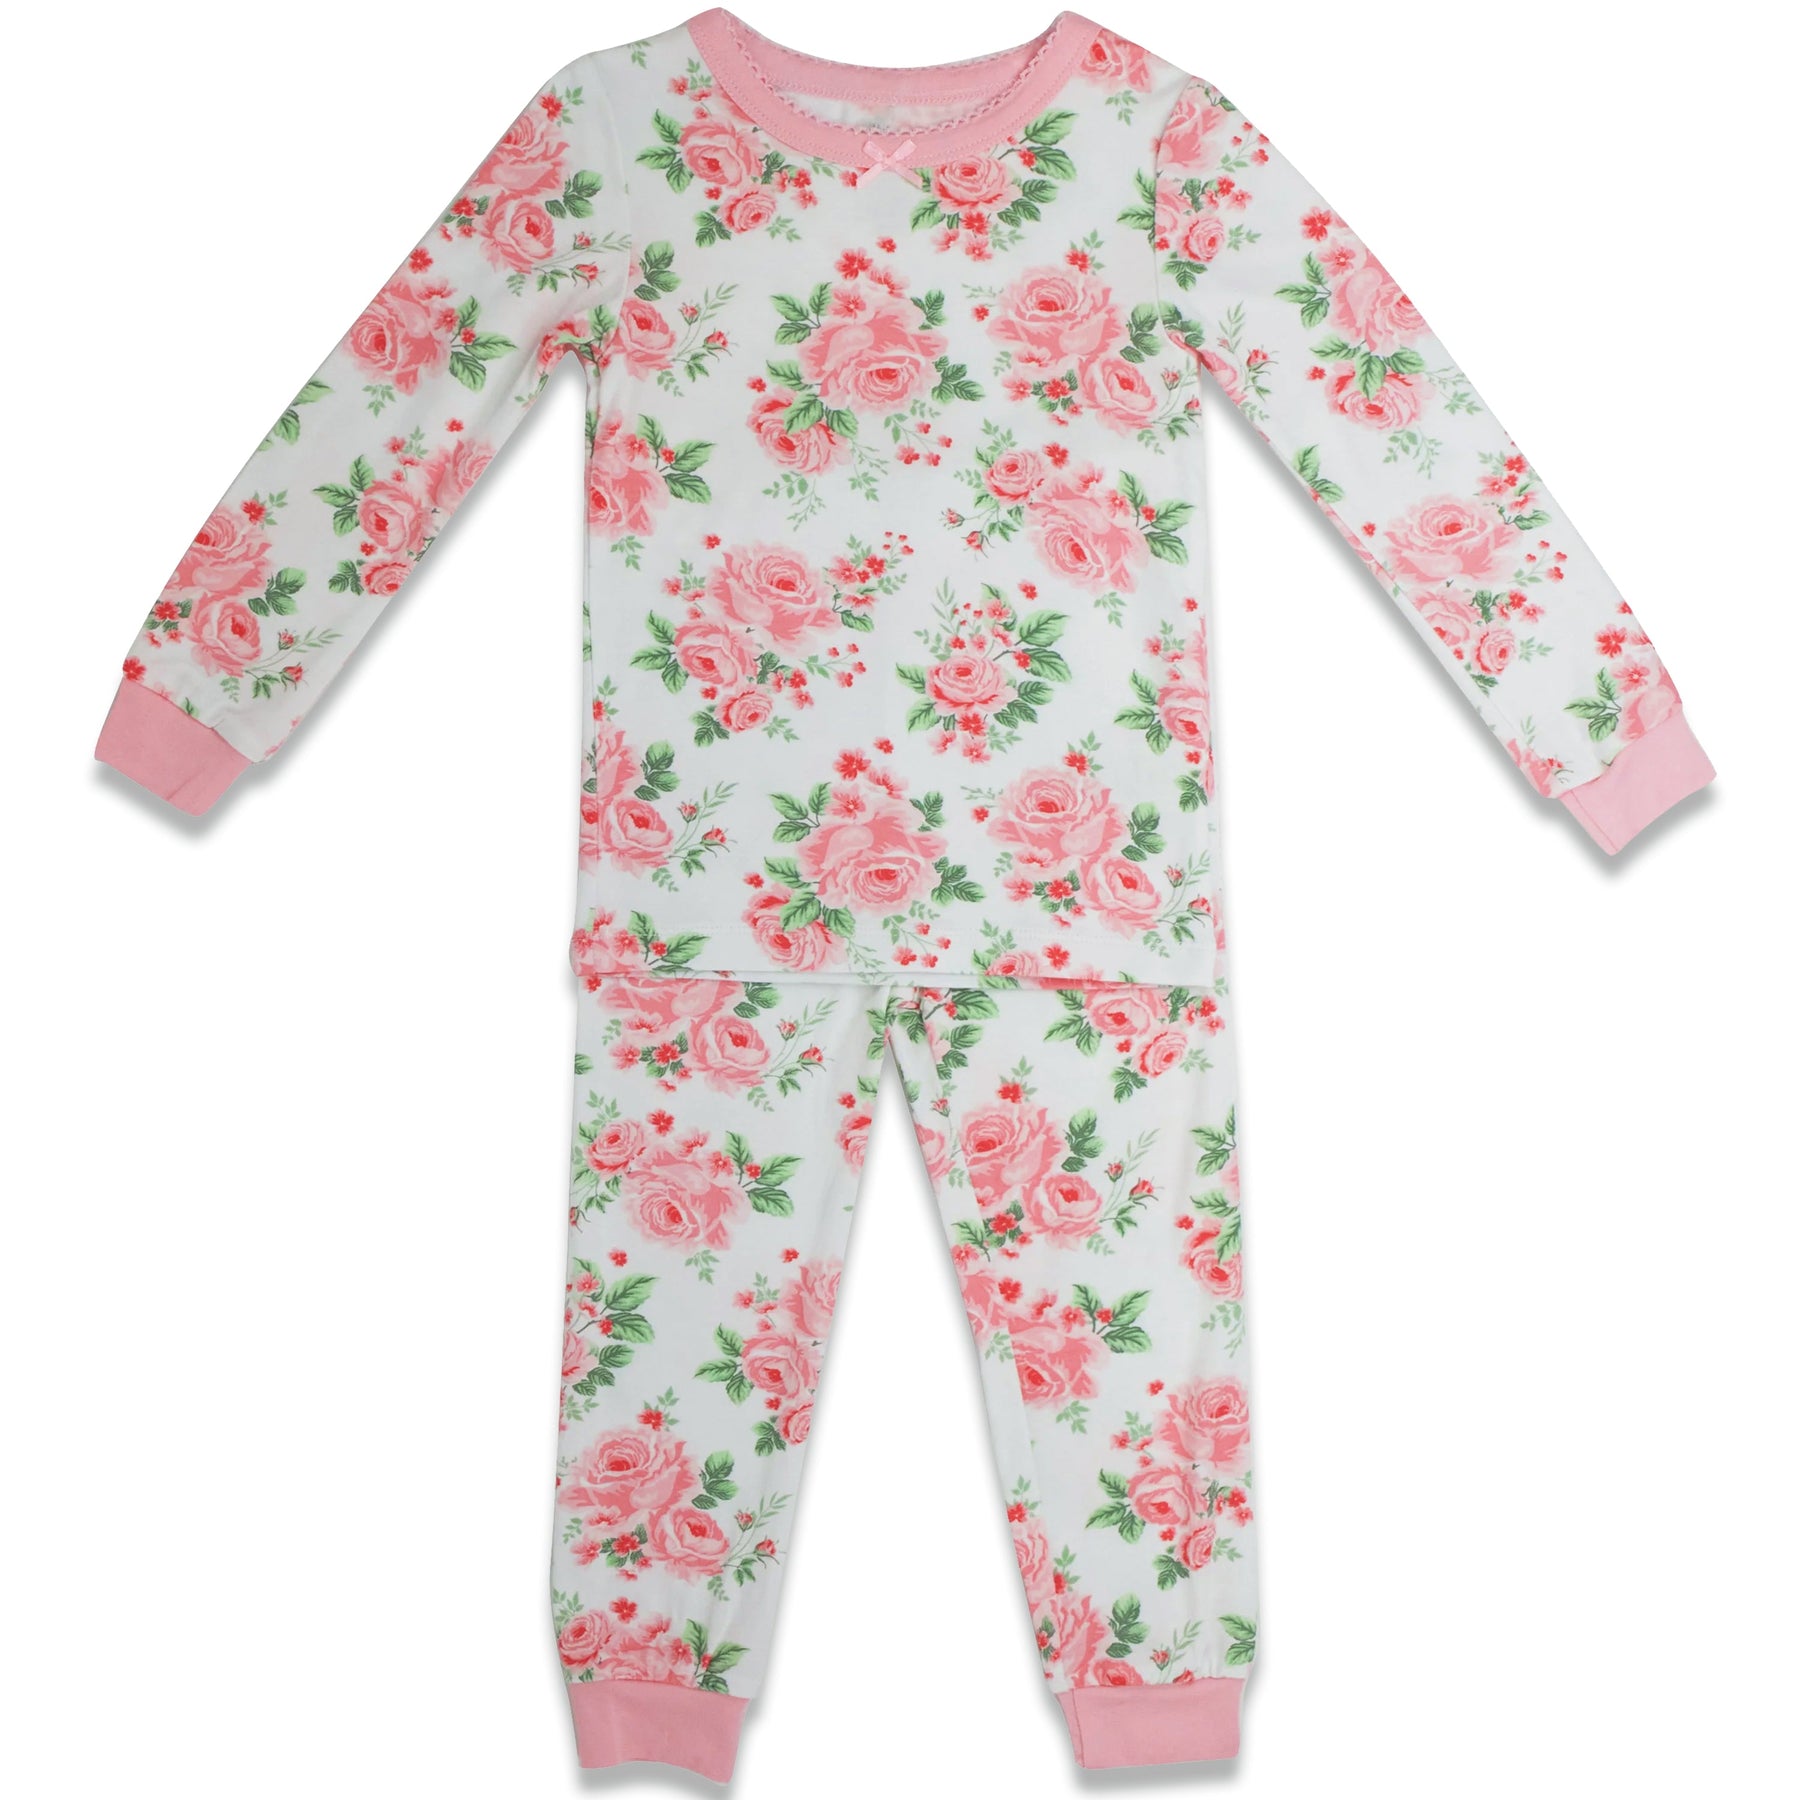 Milkberry Soft Bamboo Pajamas Toddler Pajama Set Girls in Pink Floral  Butterflies - Size 3T – Cutie Pie Baby Direct